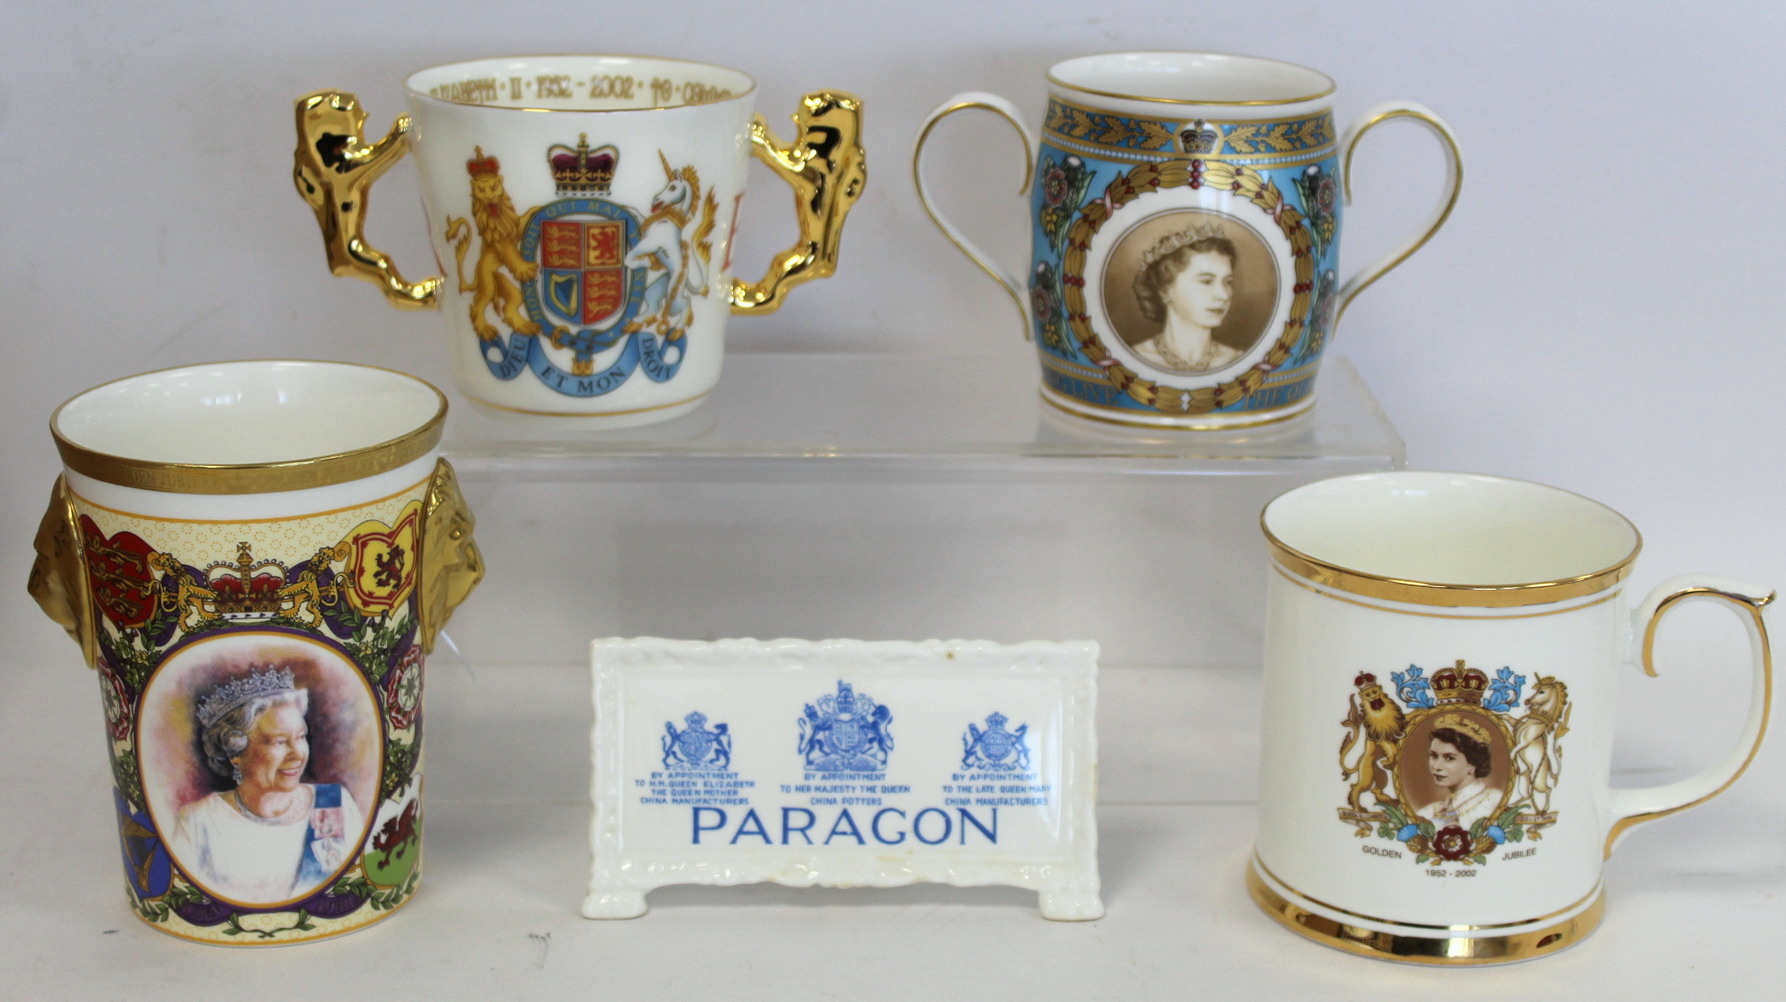 Large Paragon commemorative bone china loving cup for the Golden Jubilee 2002, limited edition no. - Bild 7 aus 8